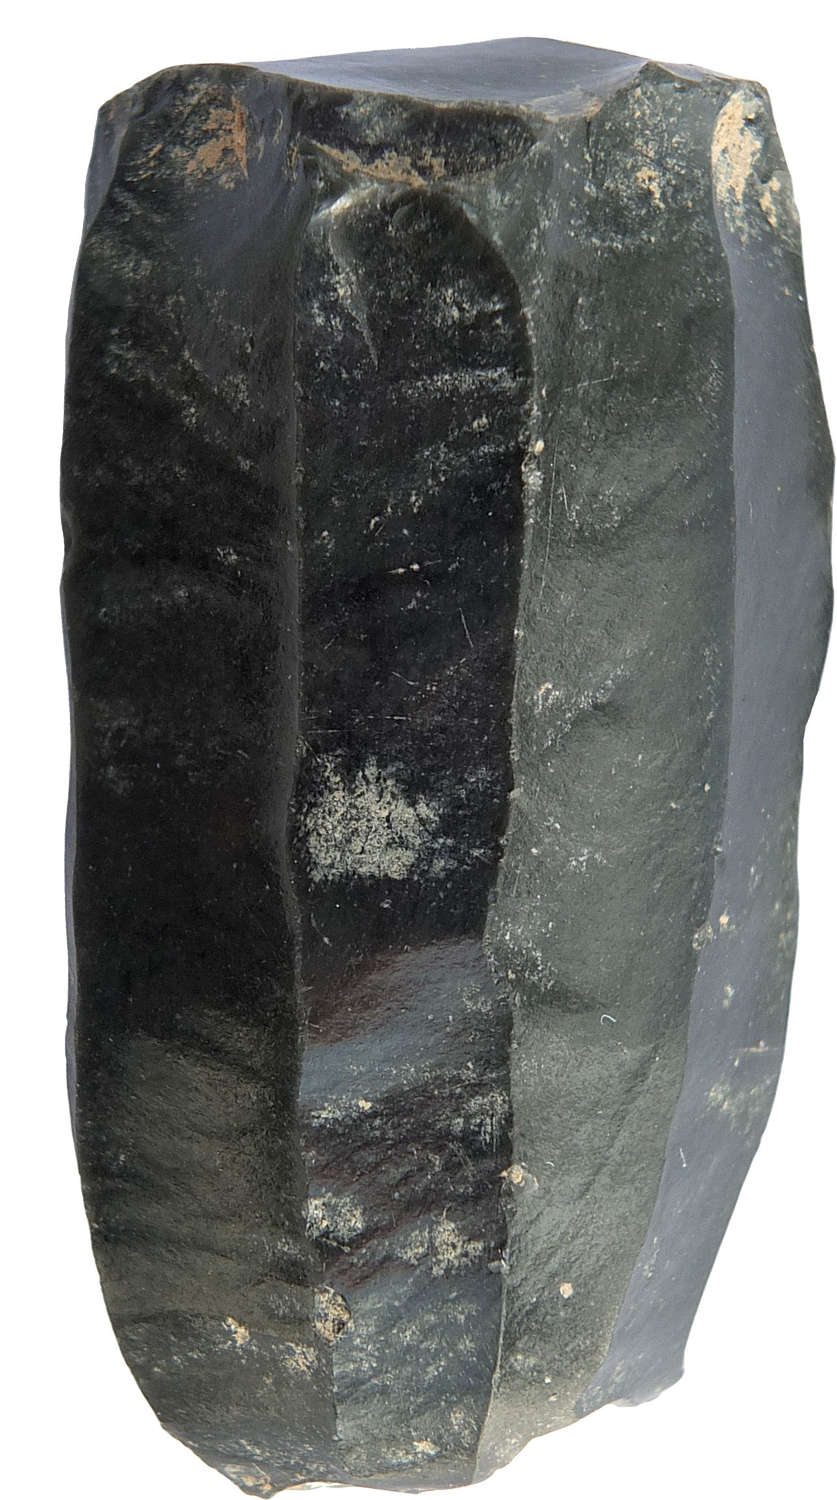 A Mexican obsidian core